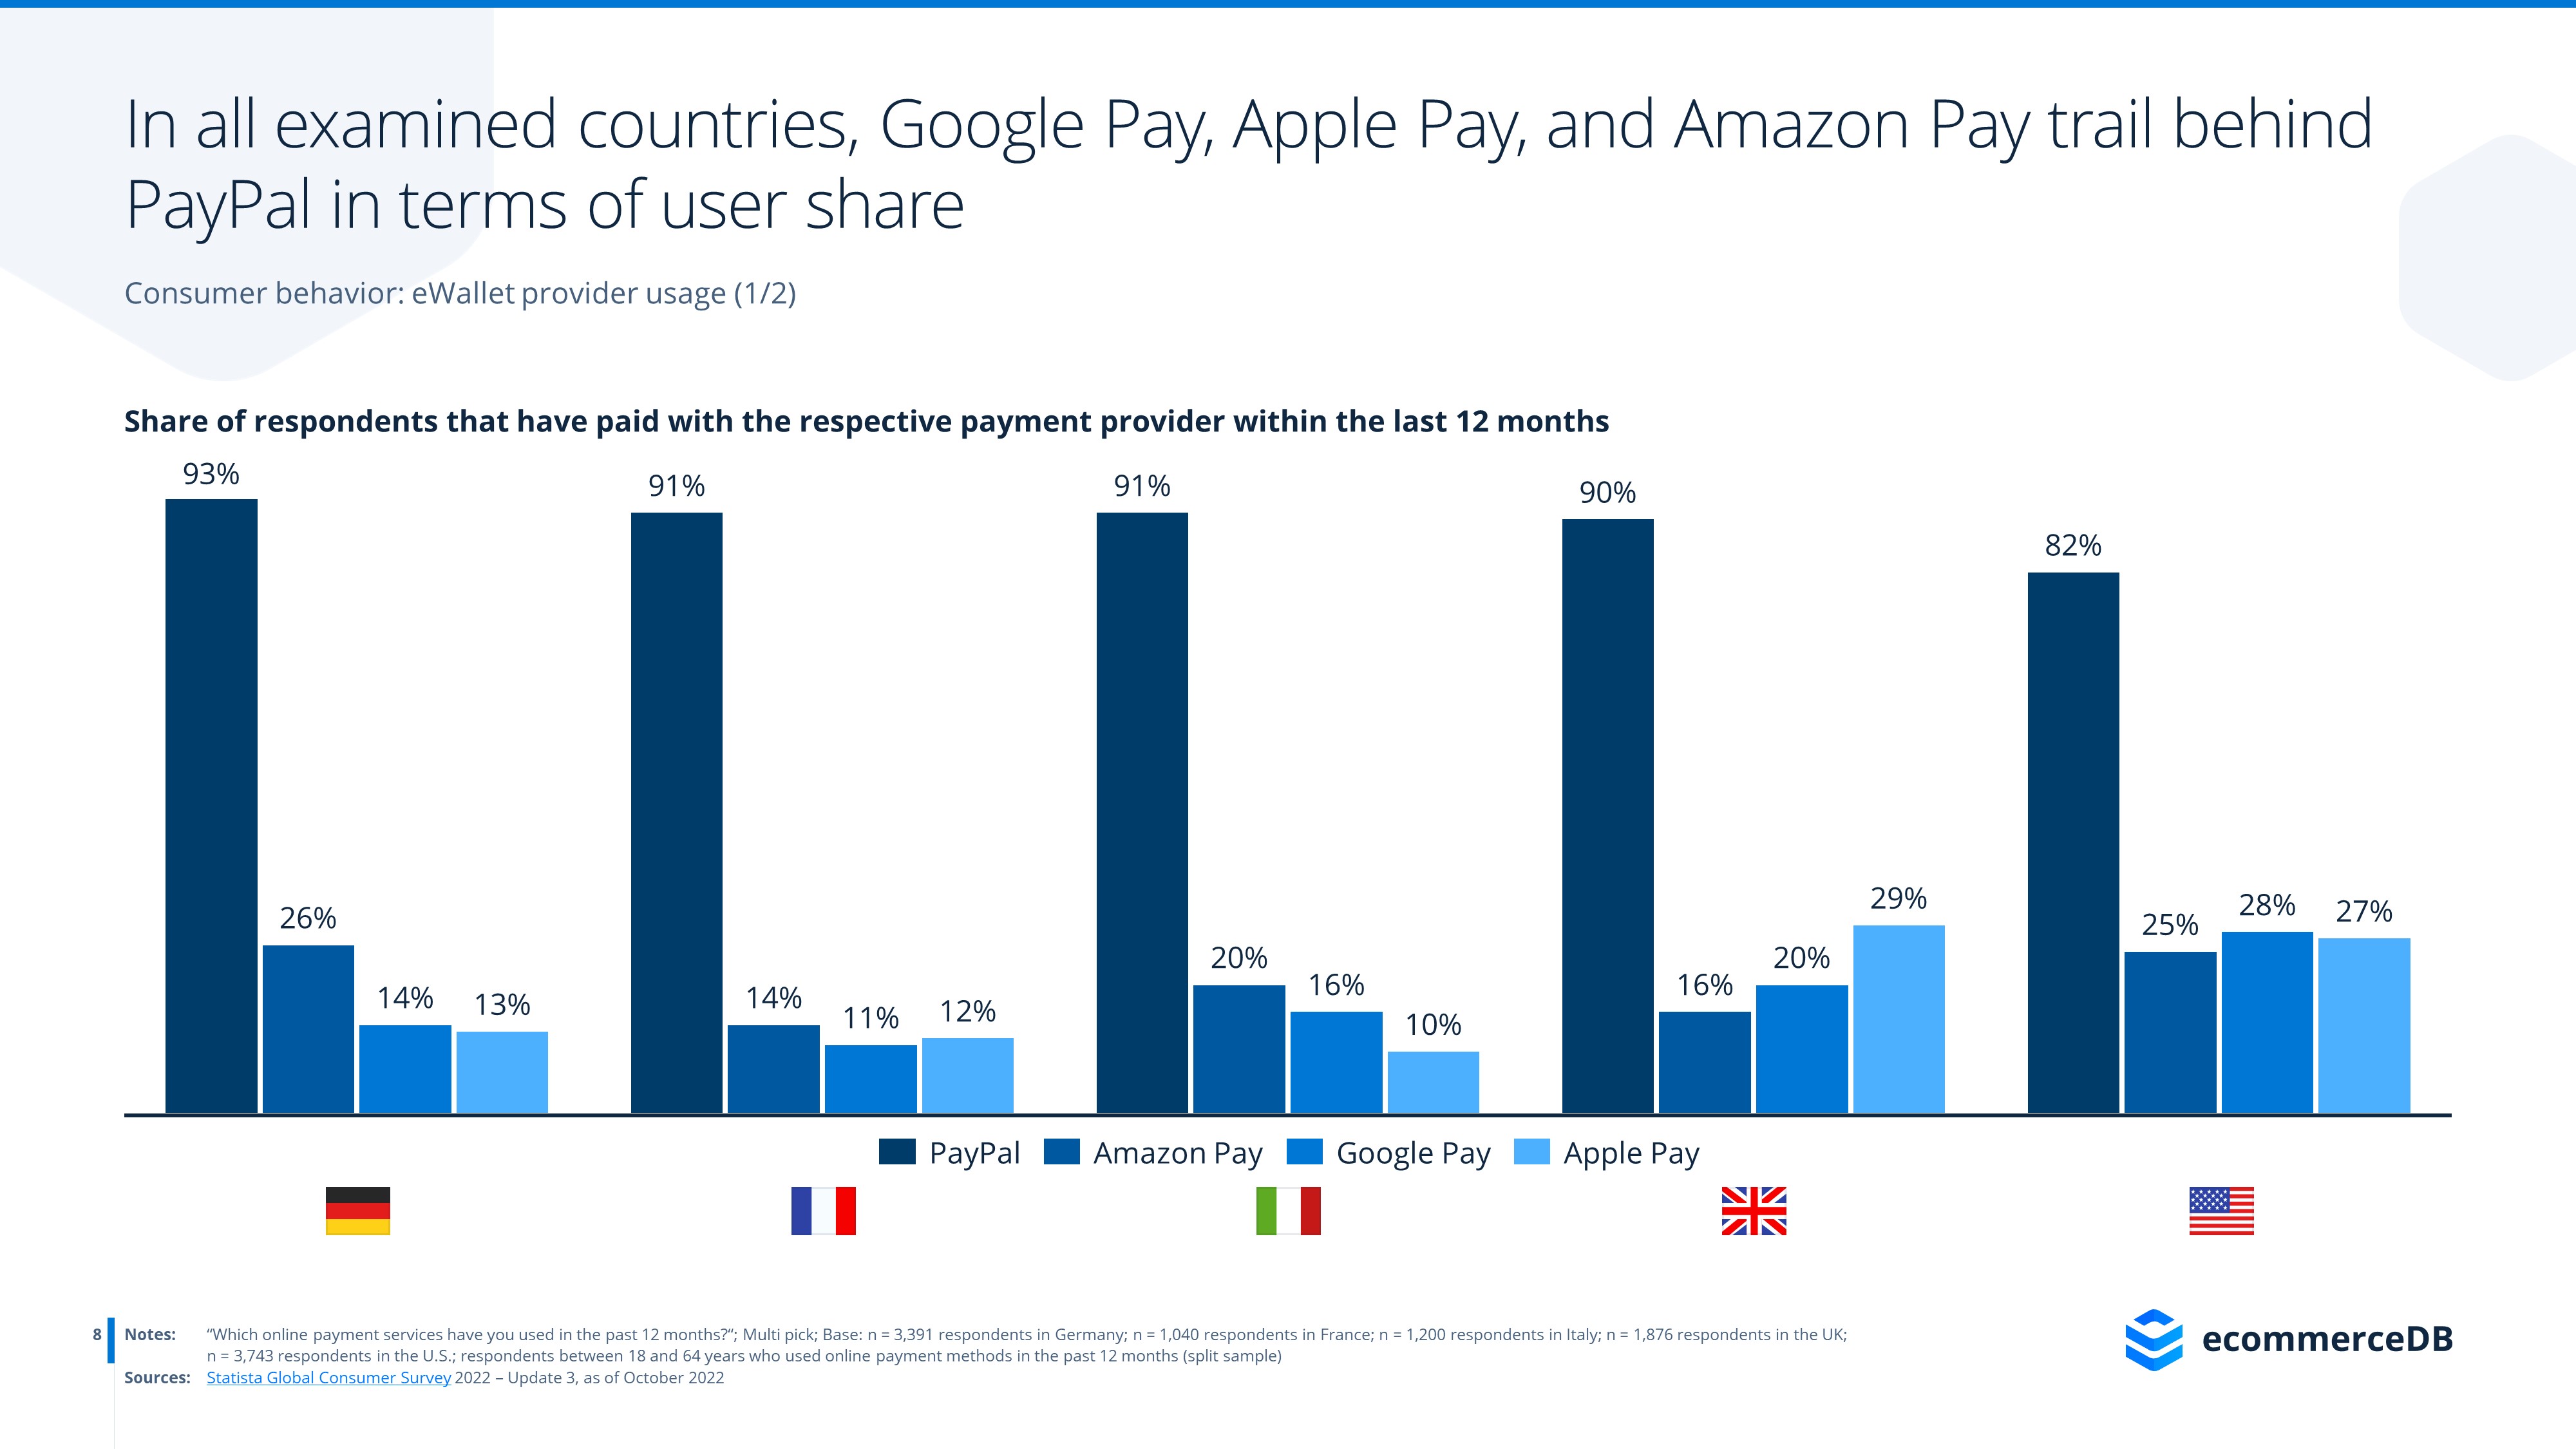 ecommerceDB Infographic: Payment Providers_Google Pay_2022_1.jpg